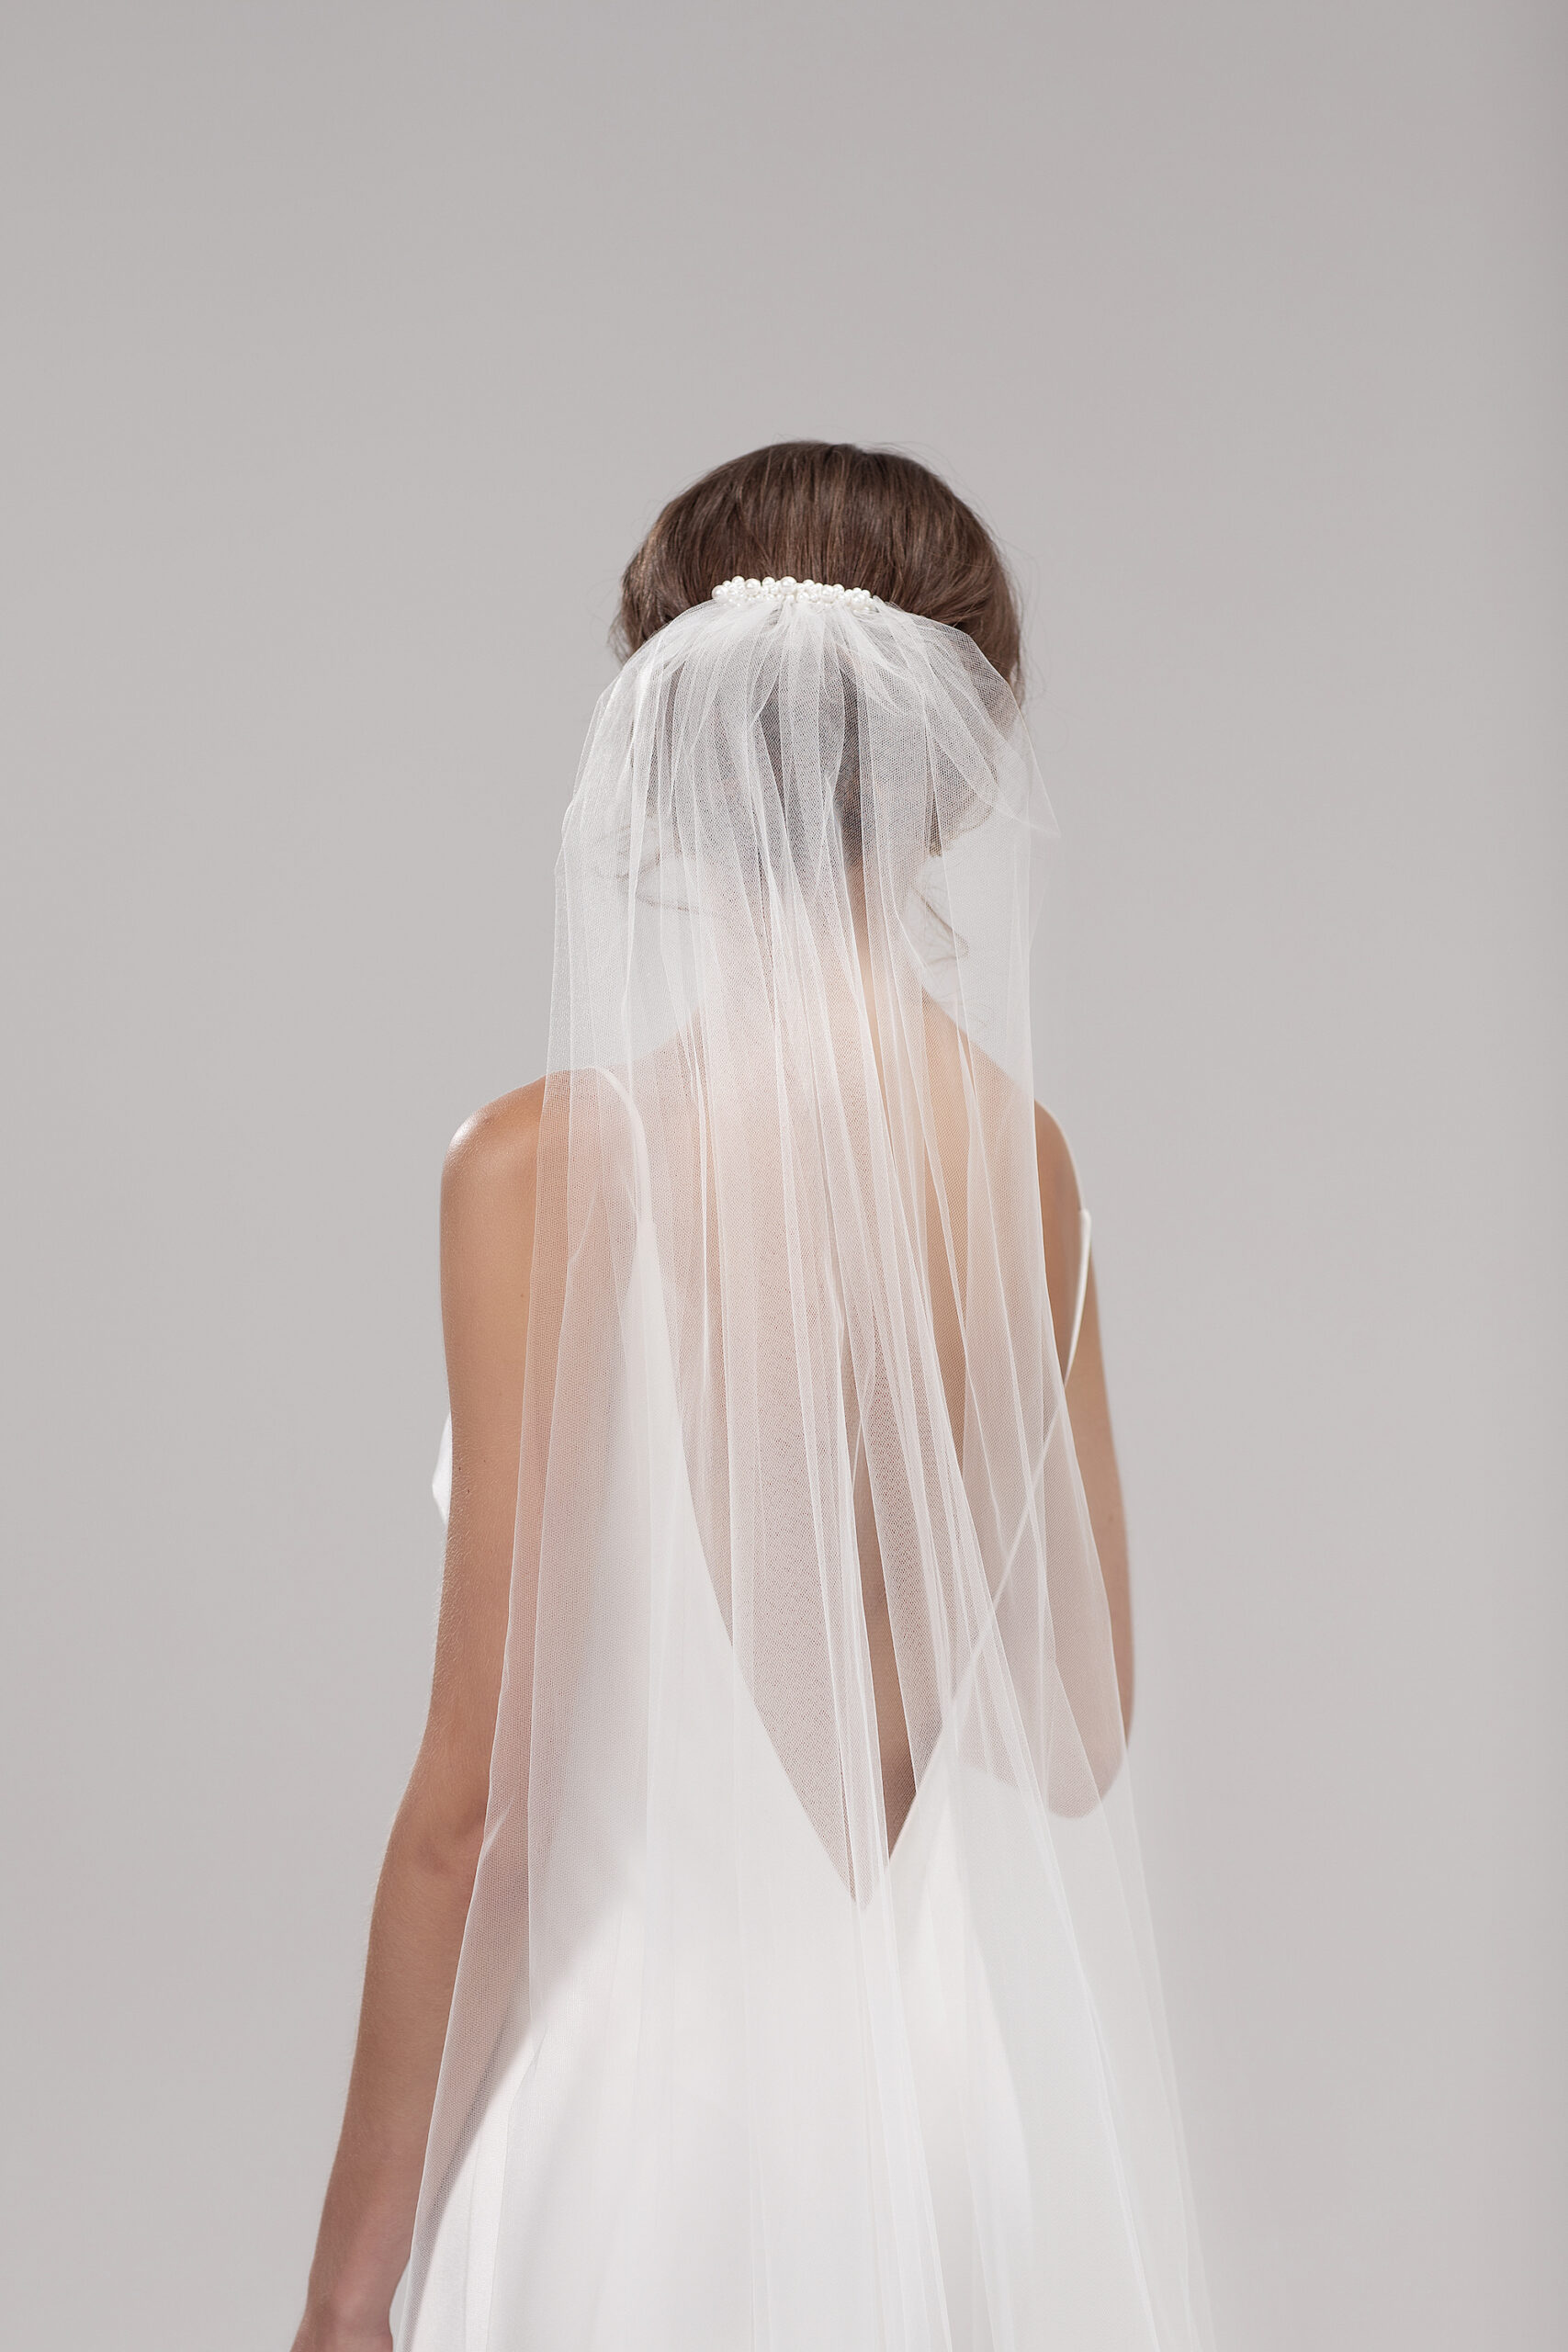 Back view of model wearing the Lily veil gathered above a low bun. Lily is a single layer 2.5m veil with a pearl comb.